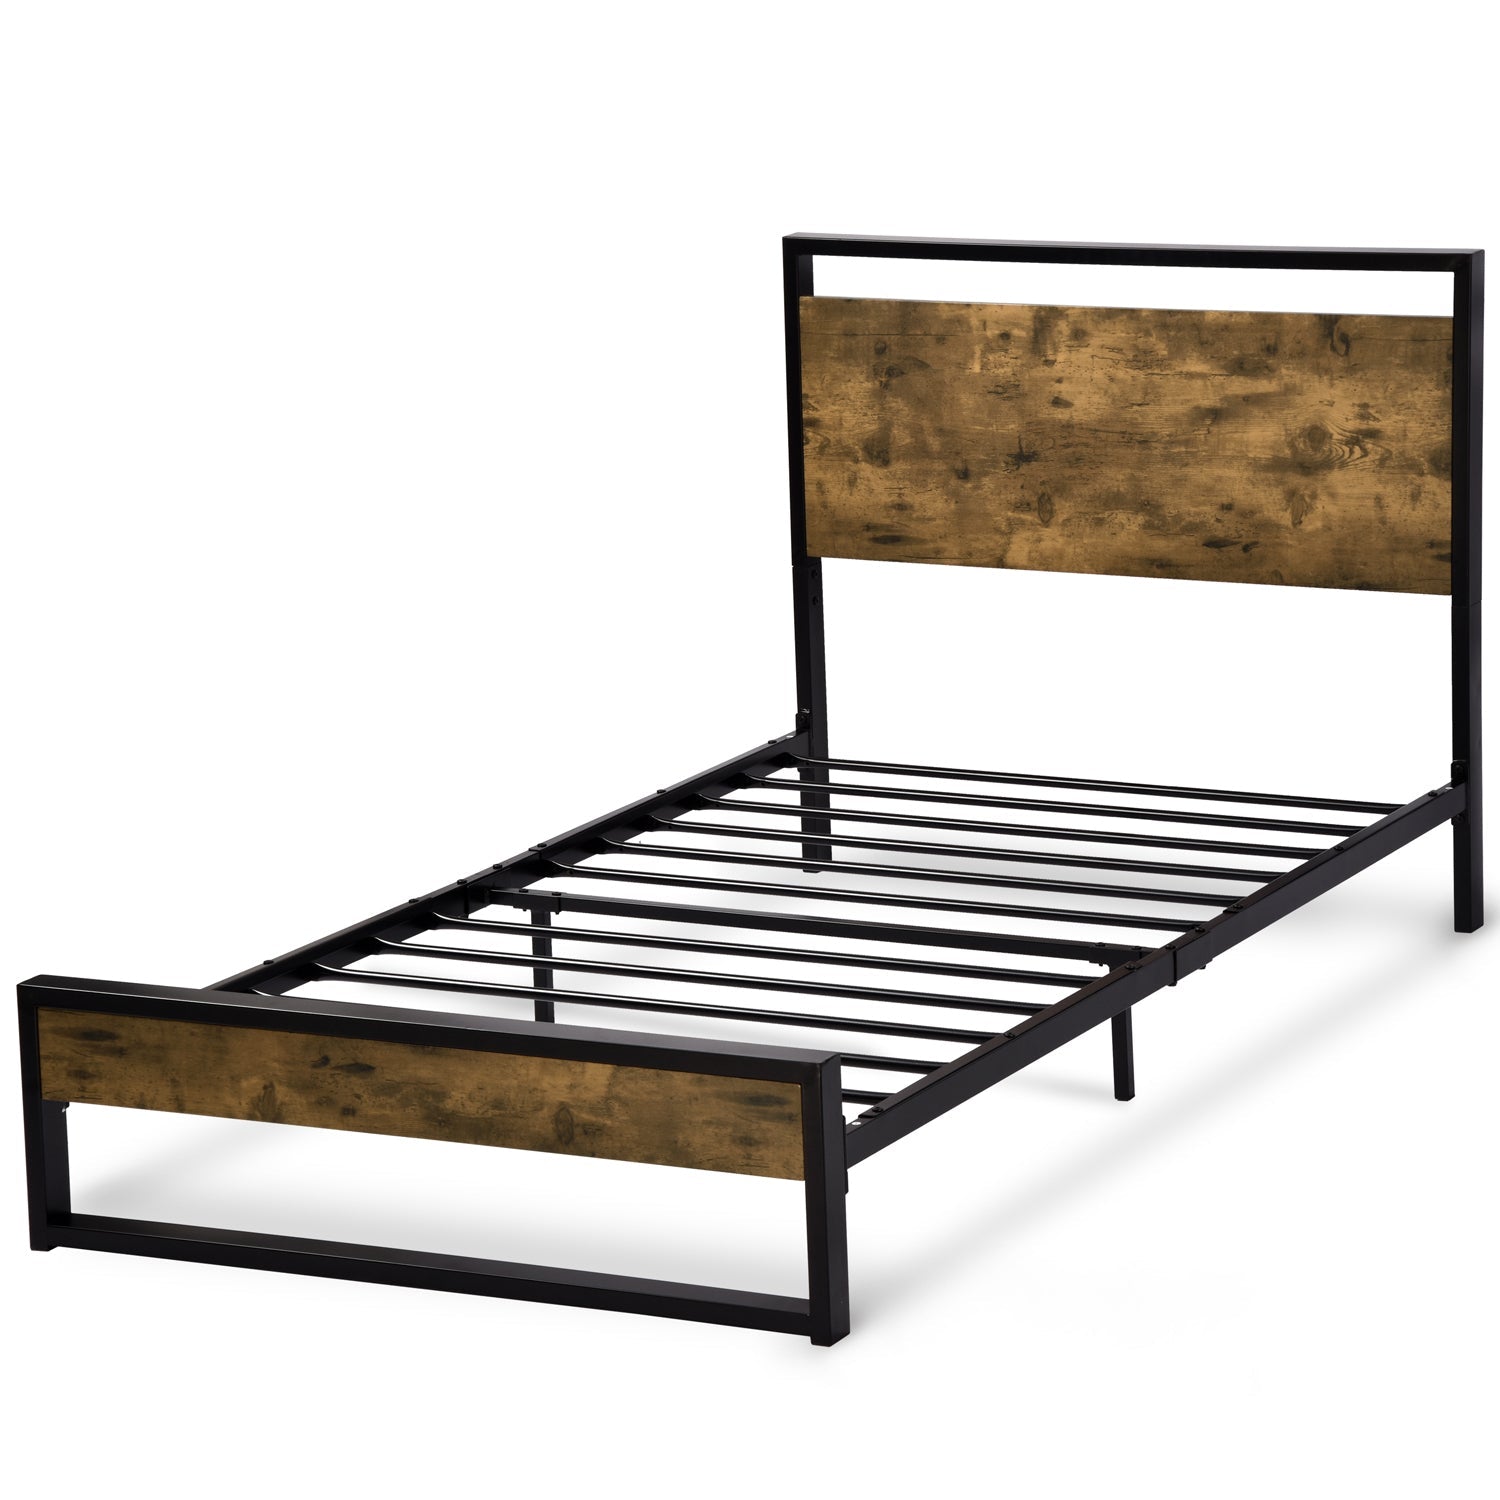 Amolife Twin Bed Frame with Wooden Headboard / 13 Strong Steel Slats Support / Single Platform Bed for Kids, Dark Brown